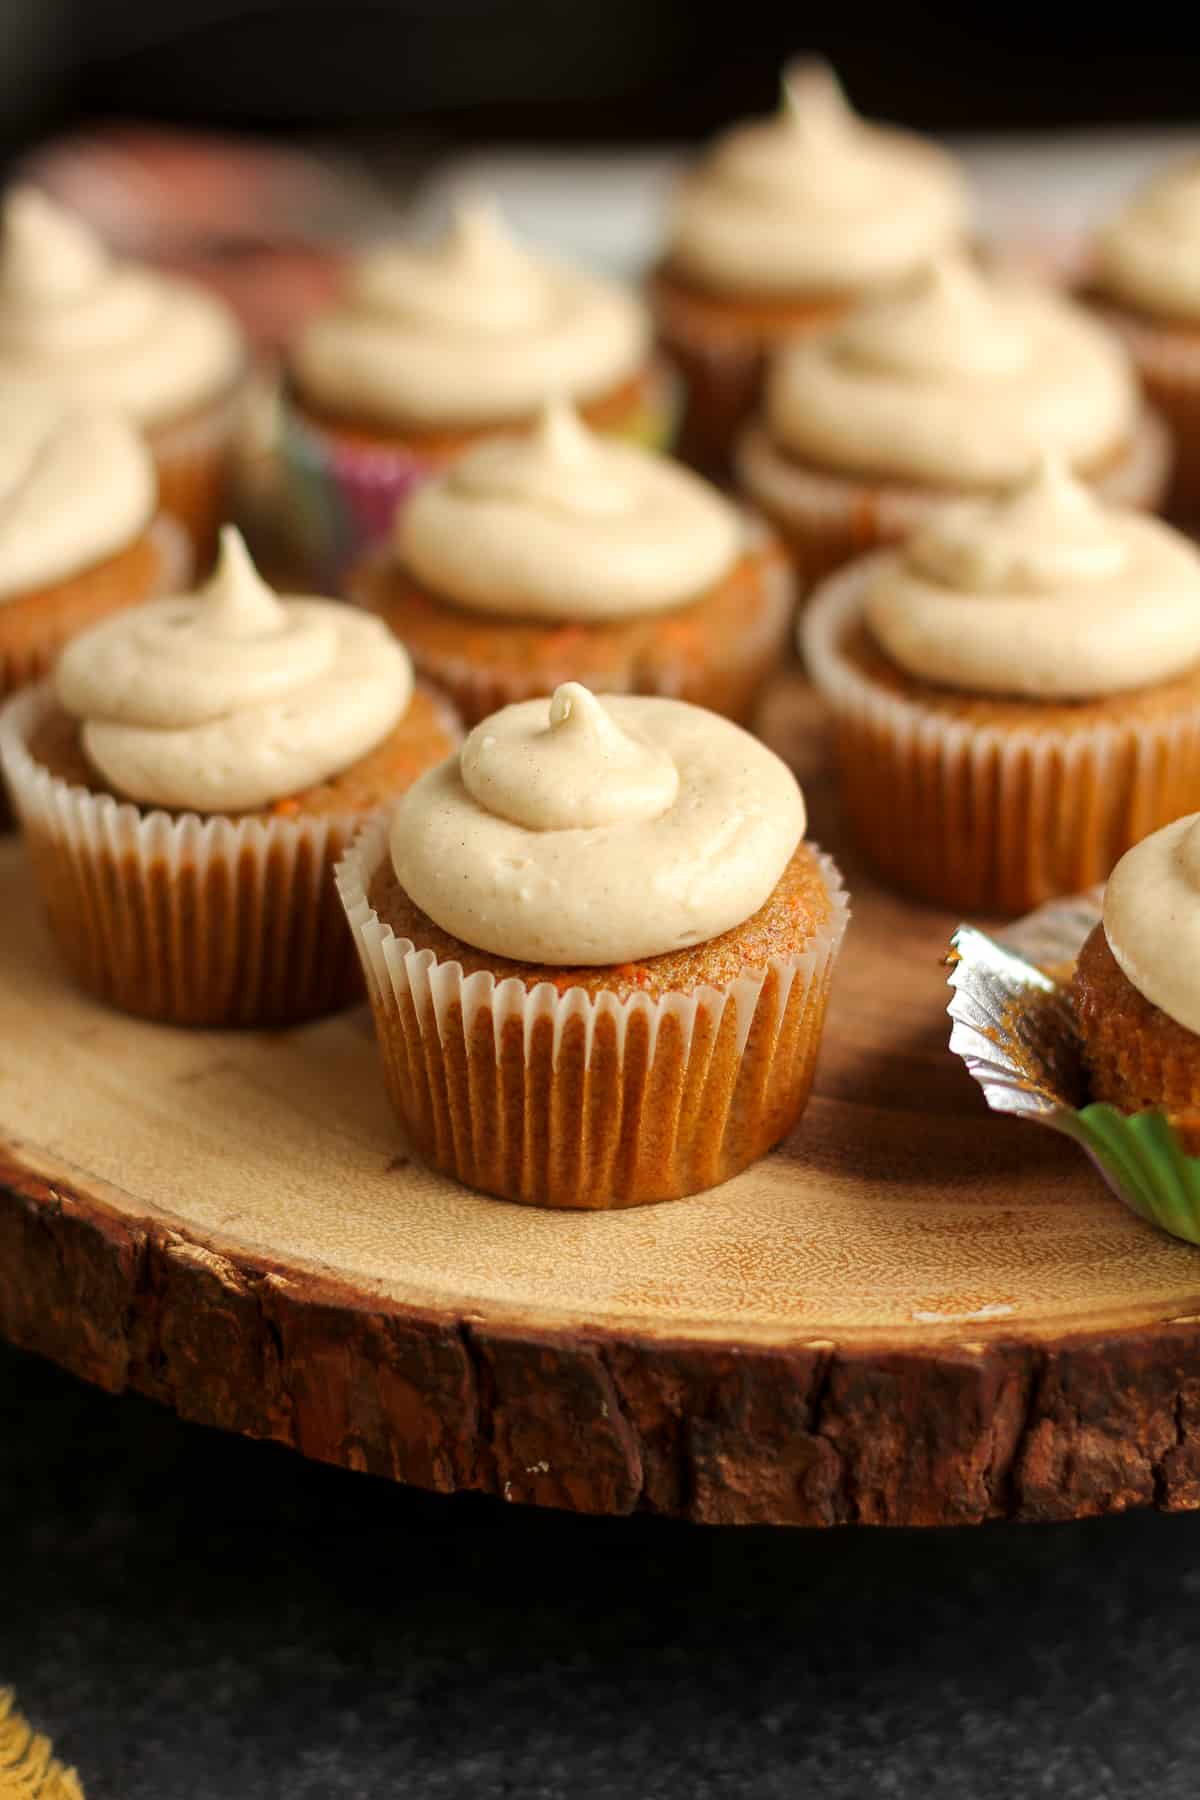 Side view of carrot cake cupcakes with cream cheese icing, all on a wooden cake stand.